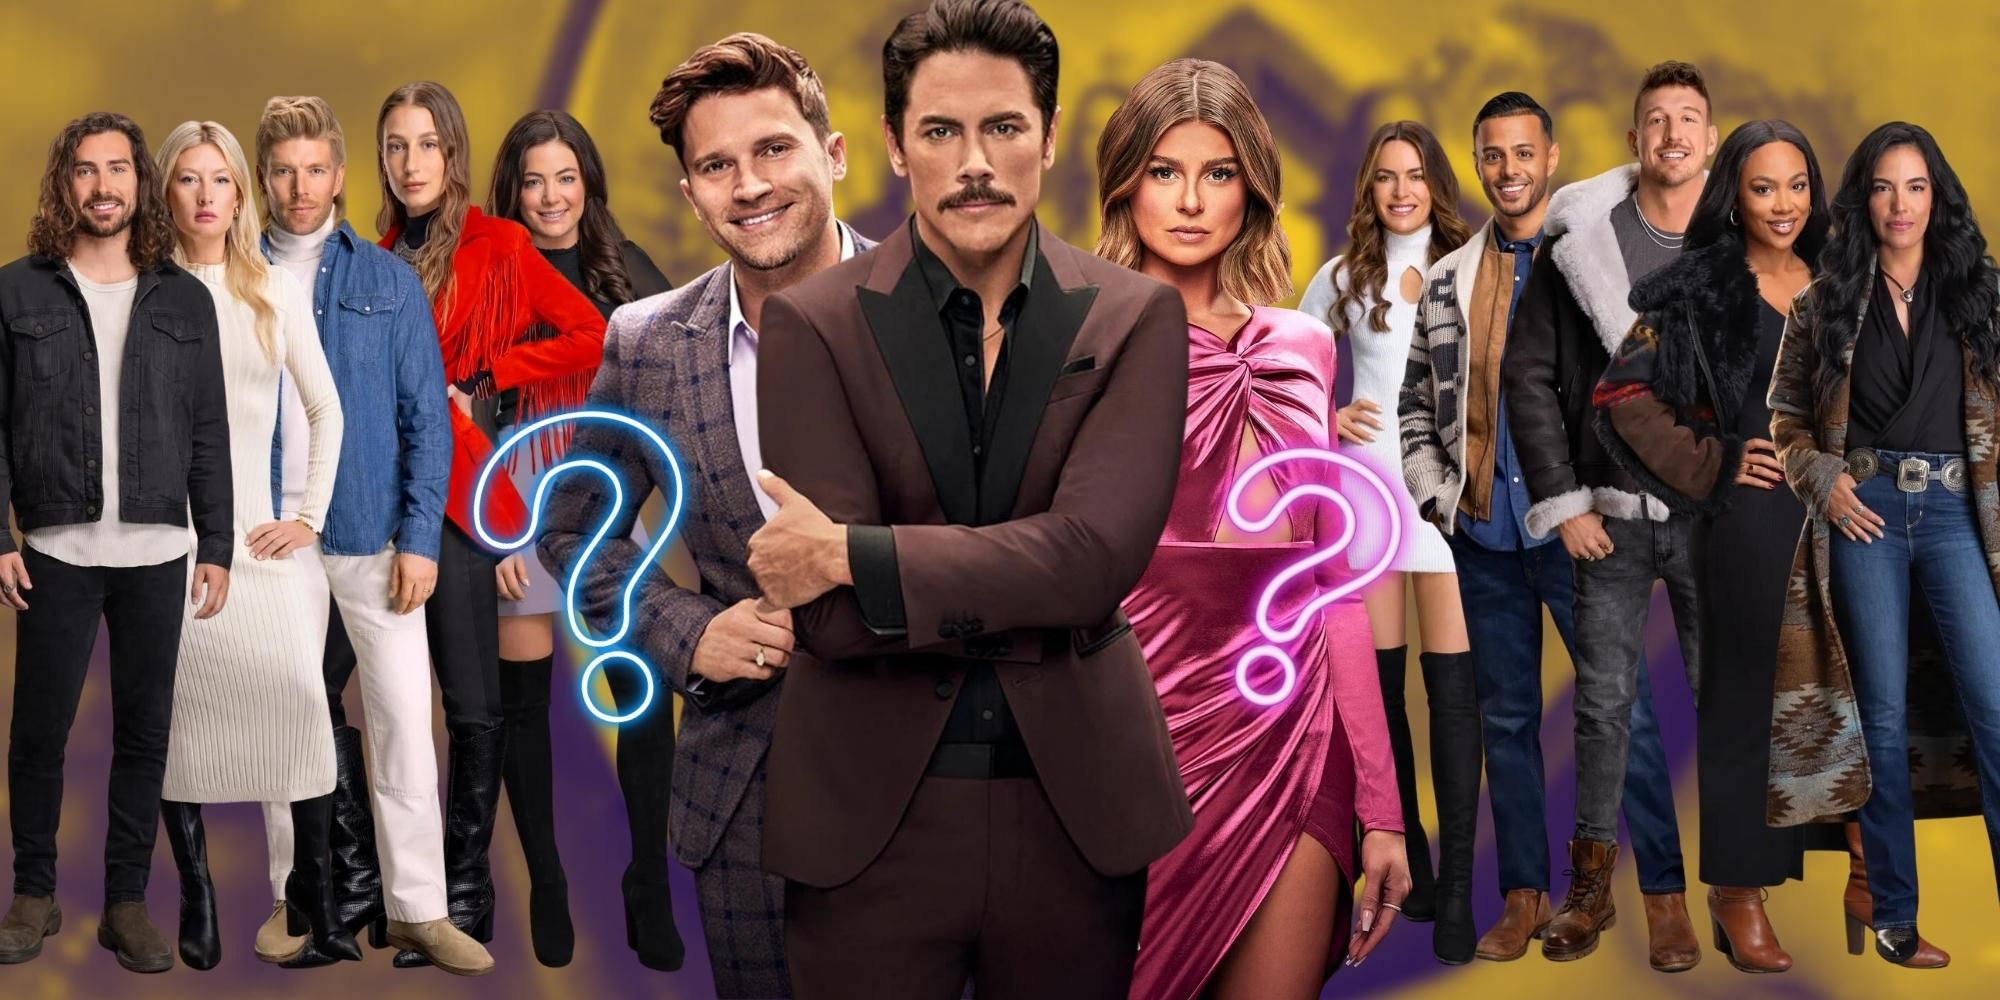 Winter House cast with Vanderpump Rules stars Tom Schwartz, Tom Sandoval and Raquel Levis, with blue and pink question marks